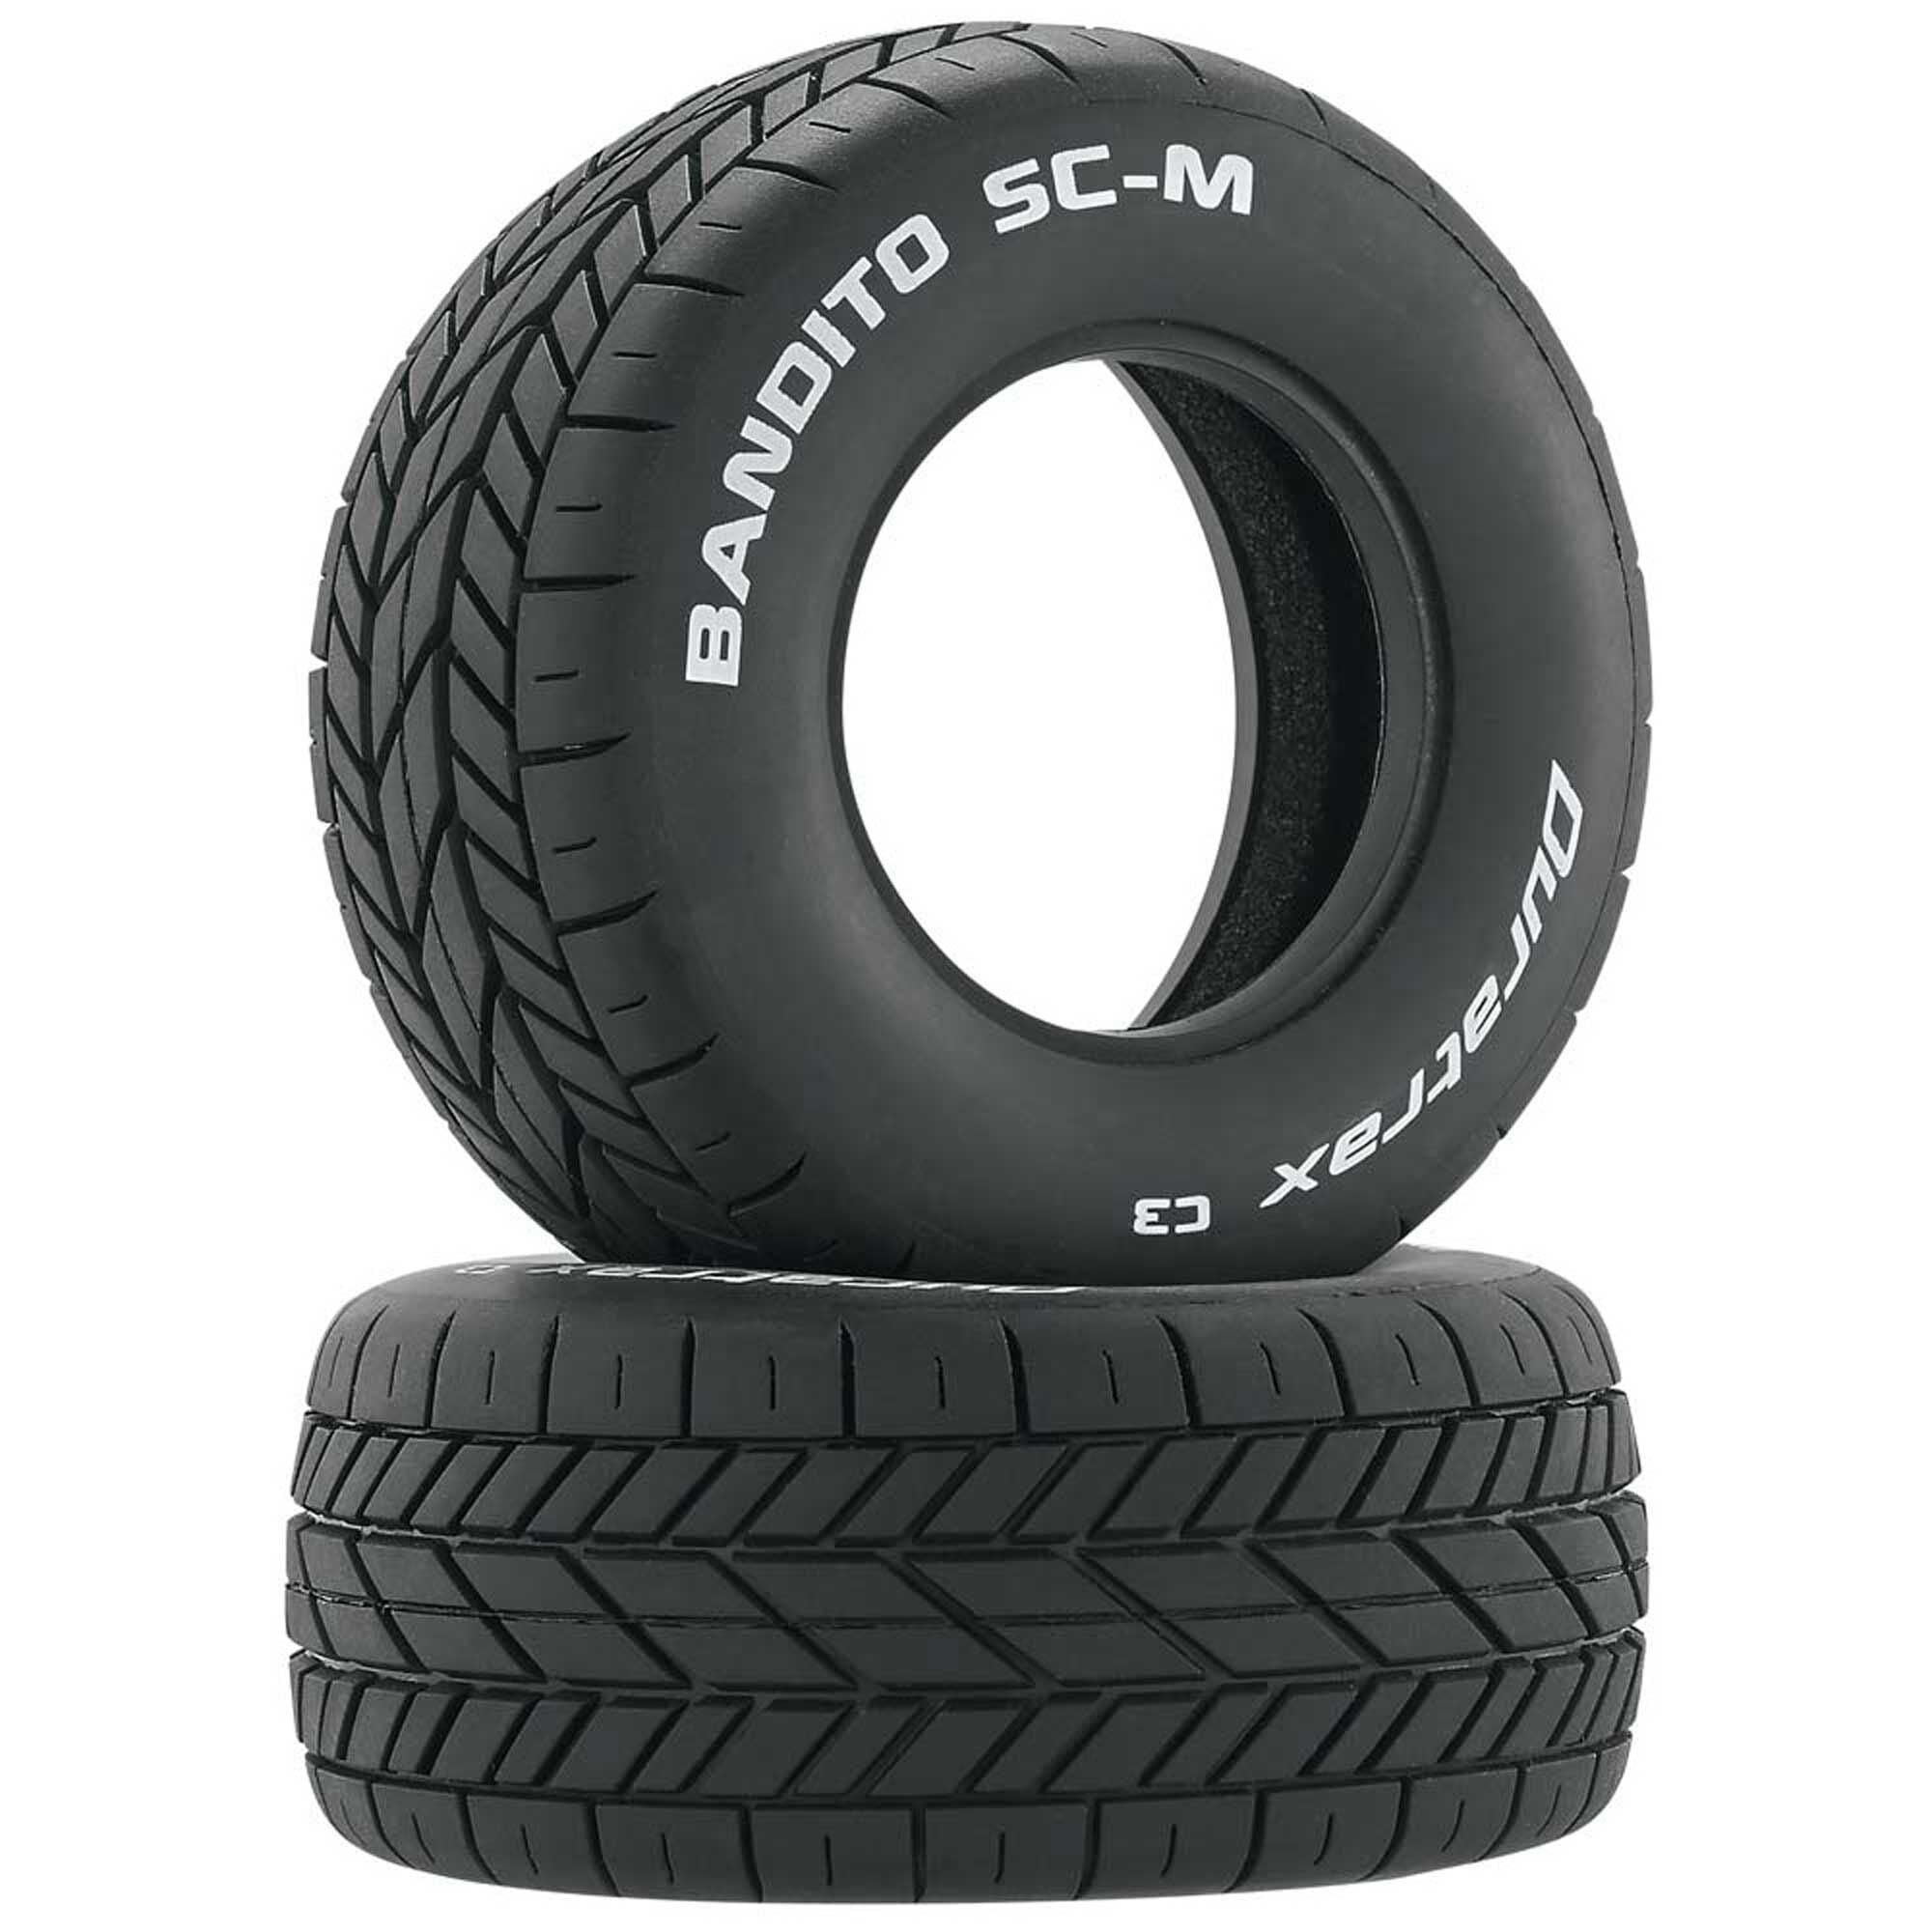 Duratrax DTXC3801 Bandito SC-M Oval Tires Only C3 (2)